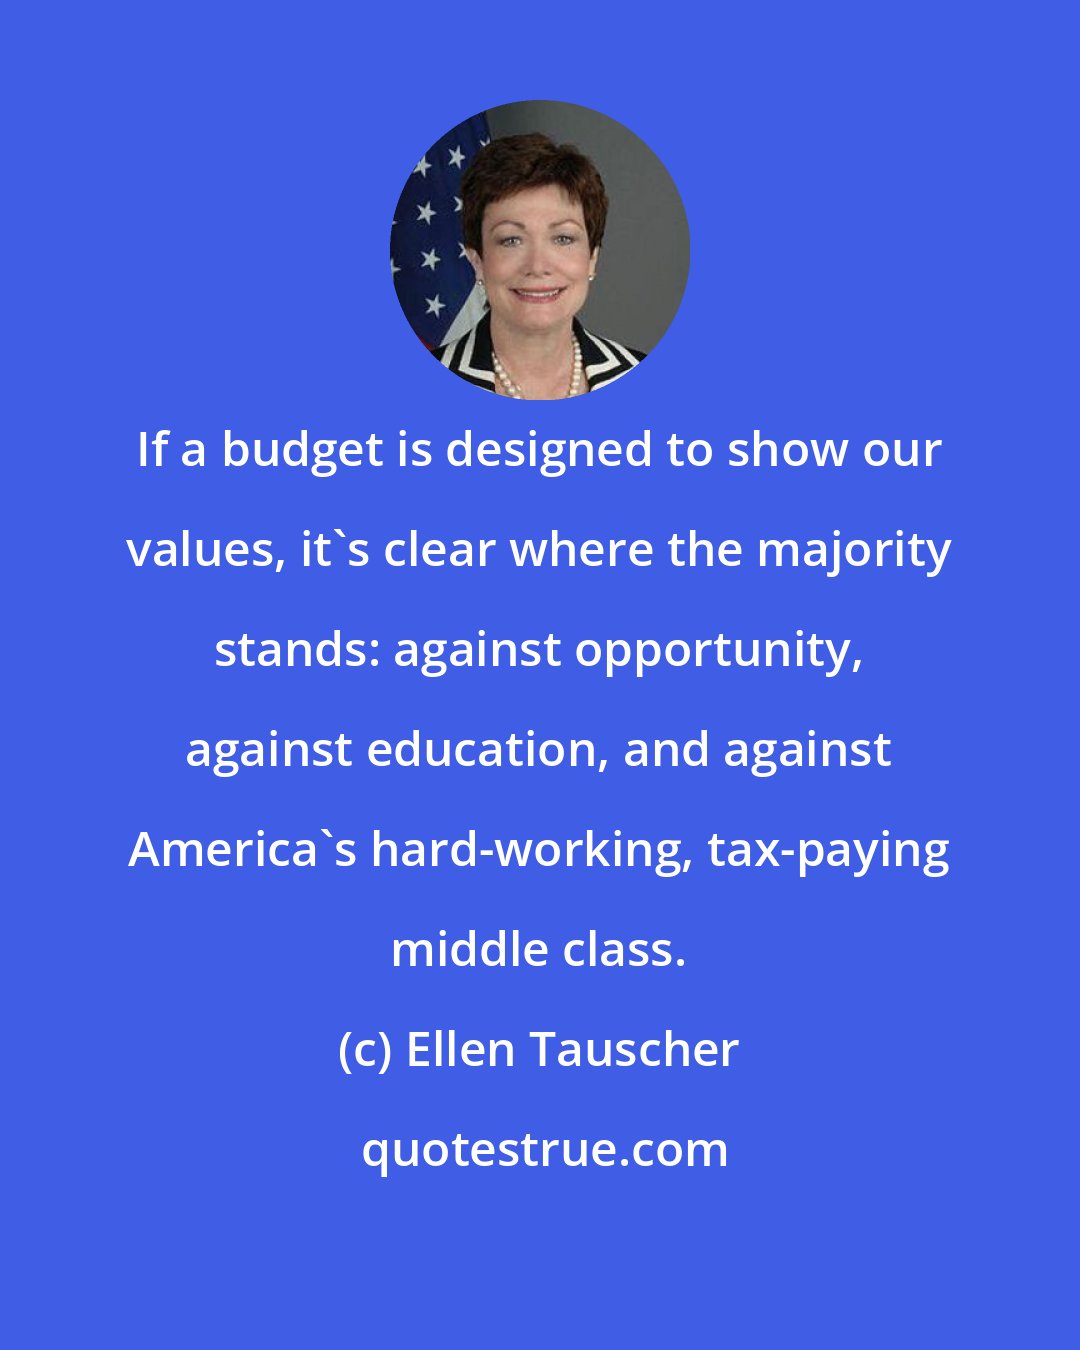 Ellen Tauscher: If a budget is designed to show our values, it's clear where the majority stands: against opportunity, against education, and against America's hard-working, tax-paying middle class.